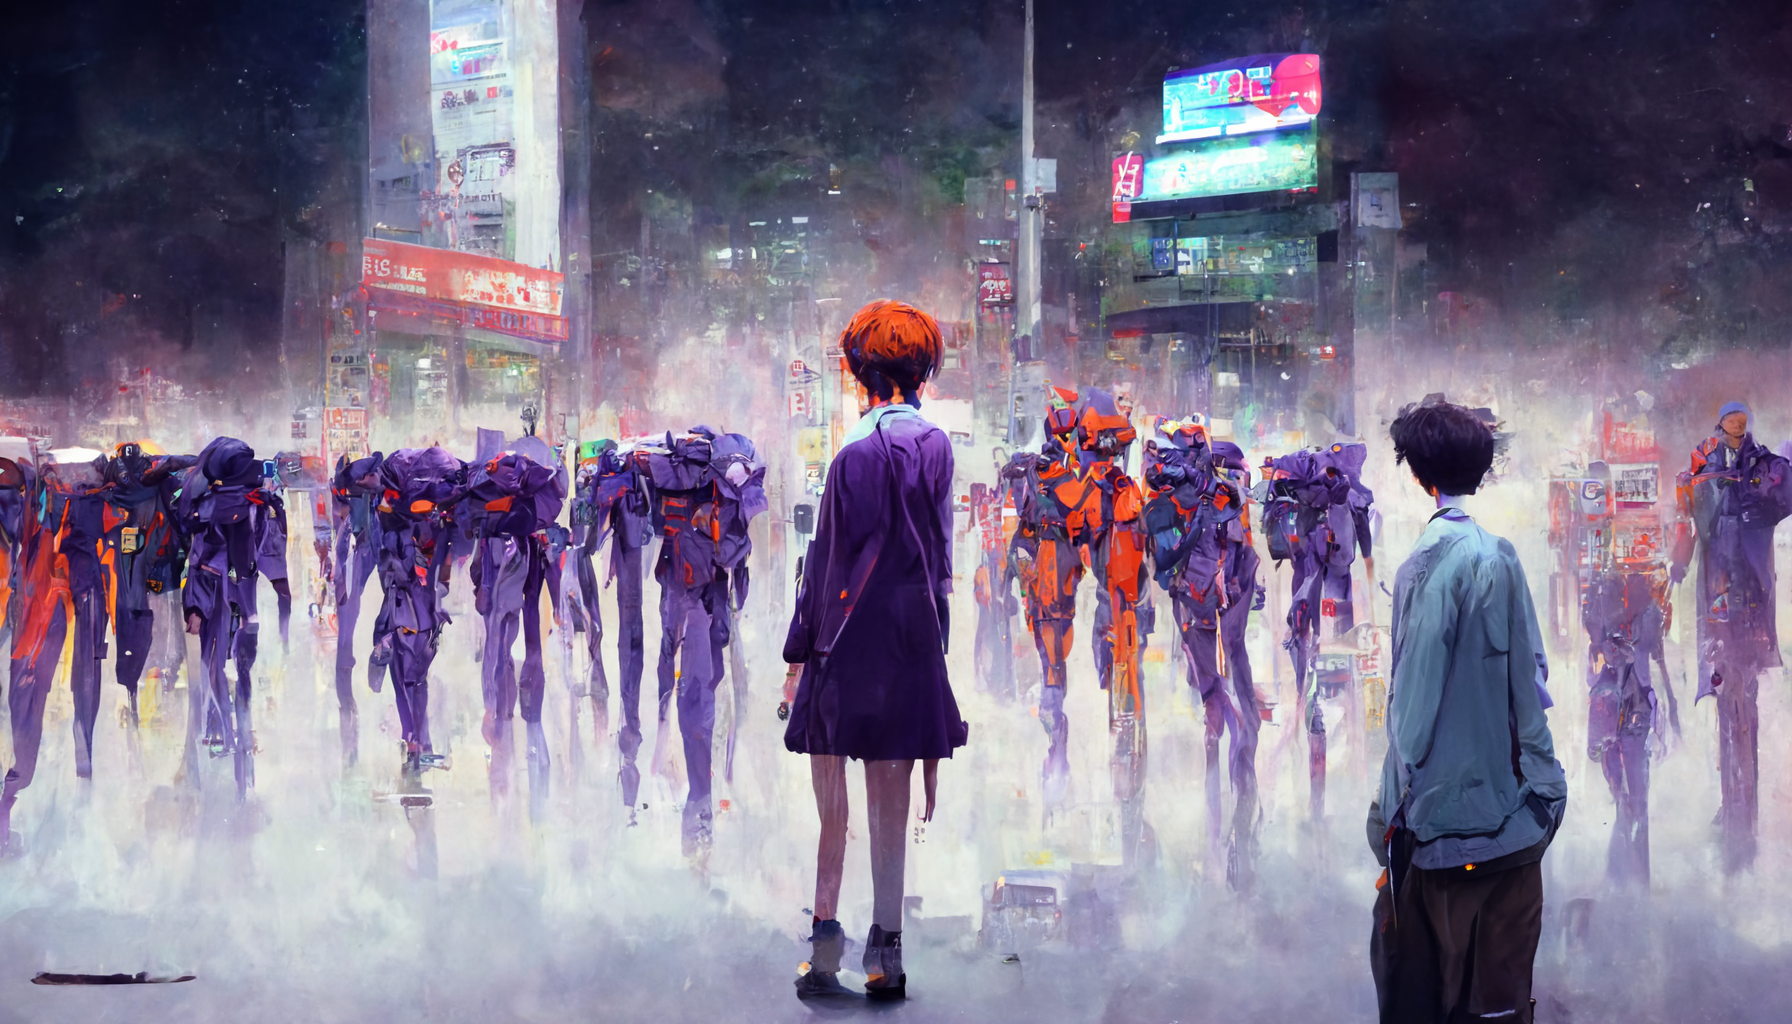 Kohji_Asakawa_evangelion_and_people_standing_in_the_streets_of__7f2339e1-745a-4660-a83c-be0eddd305f0.png